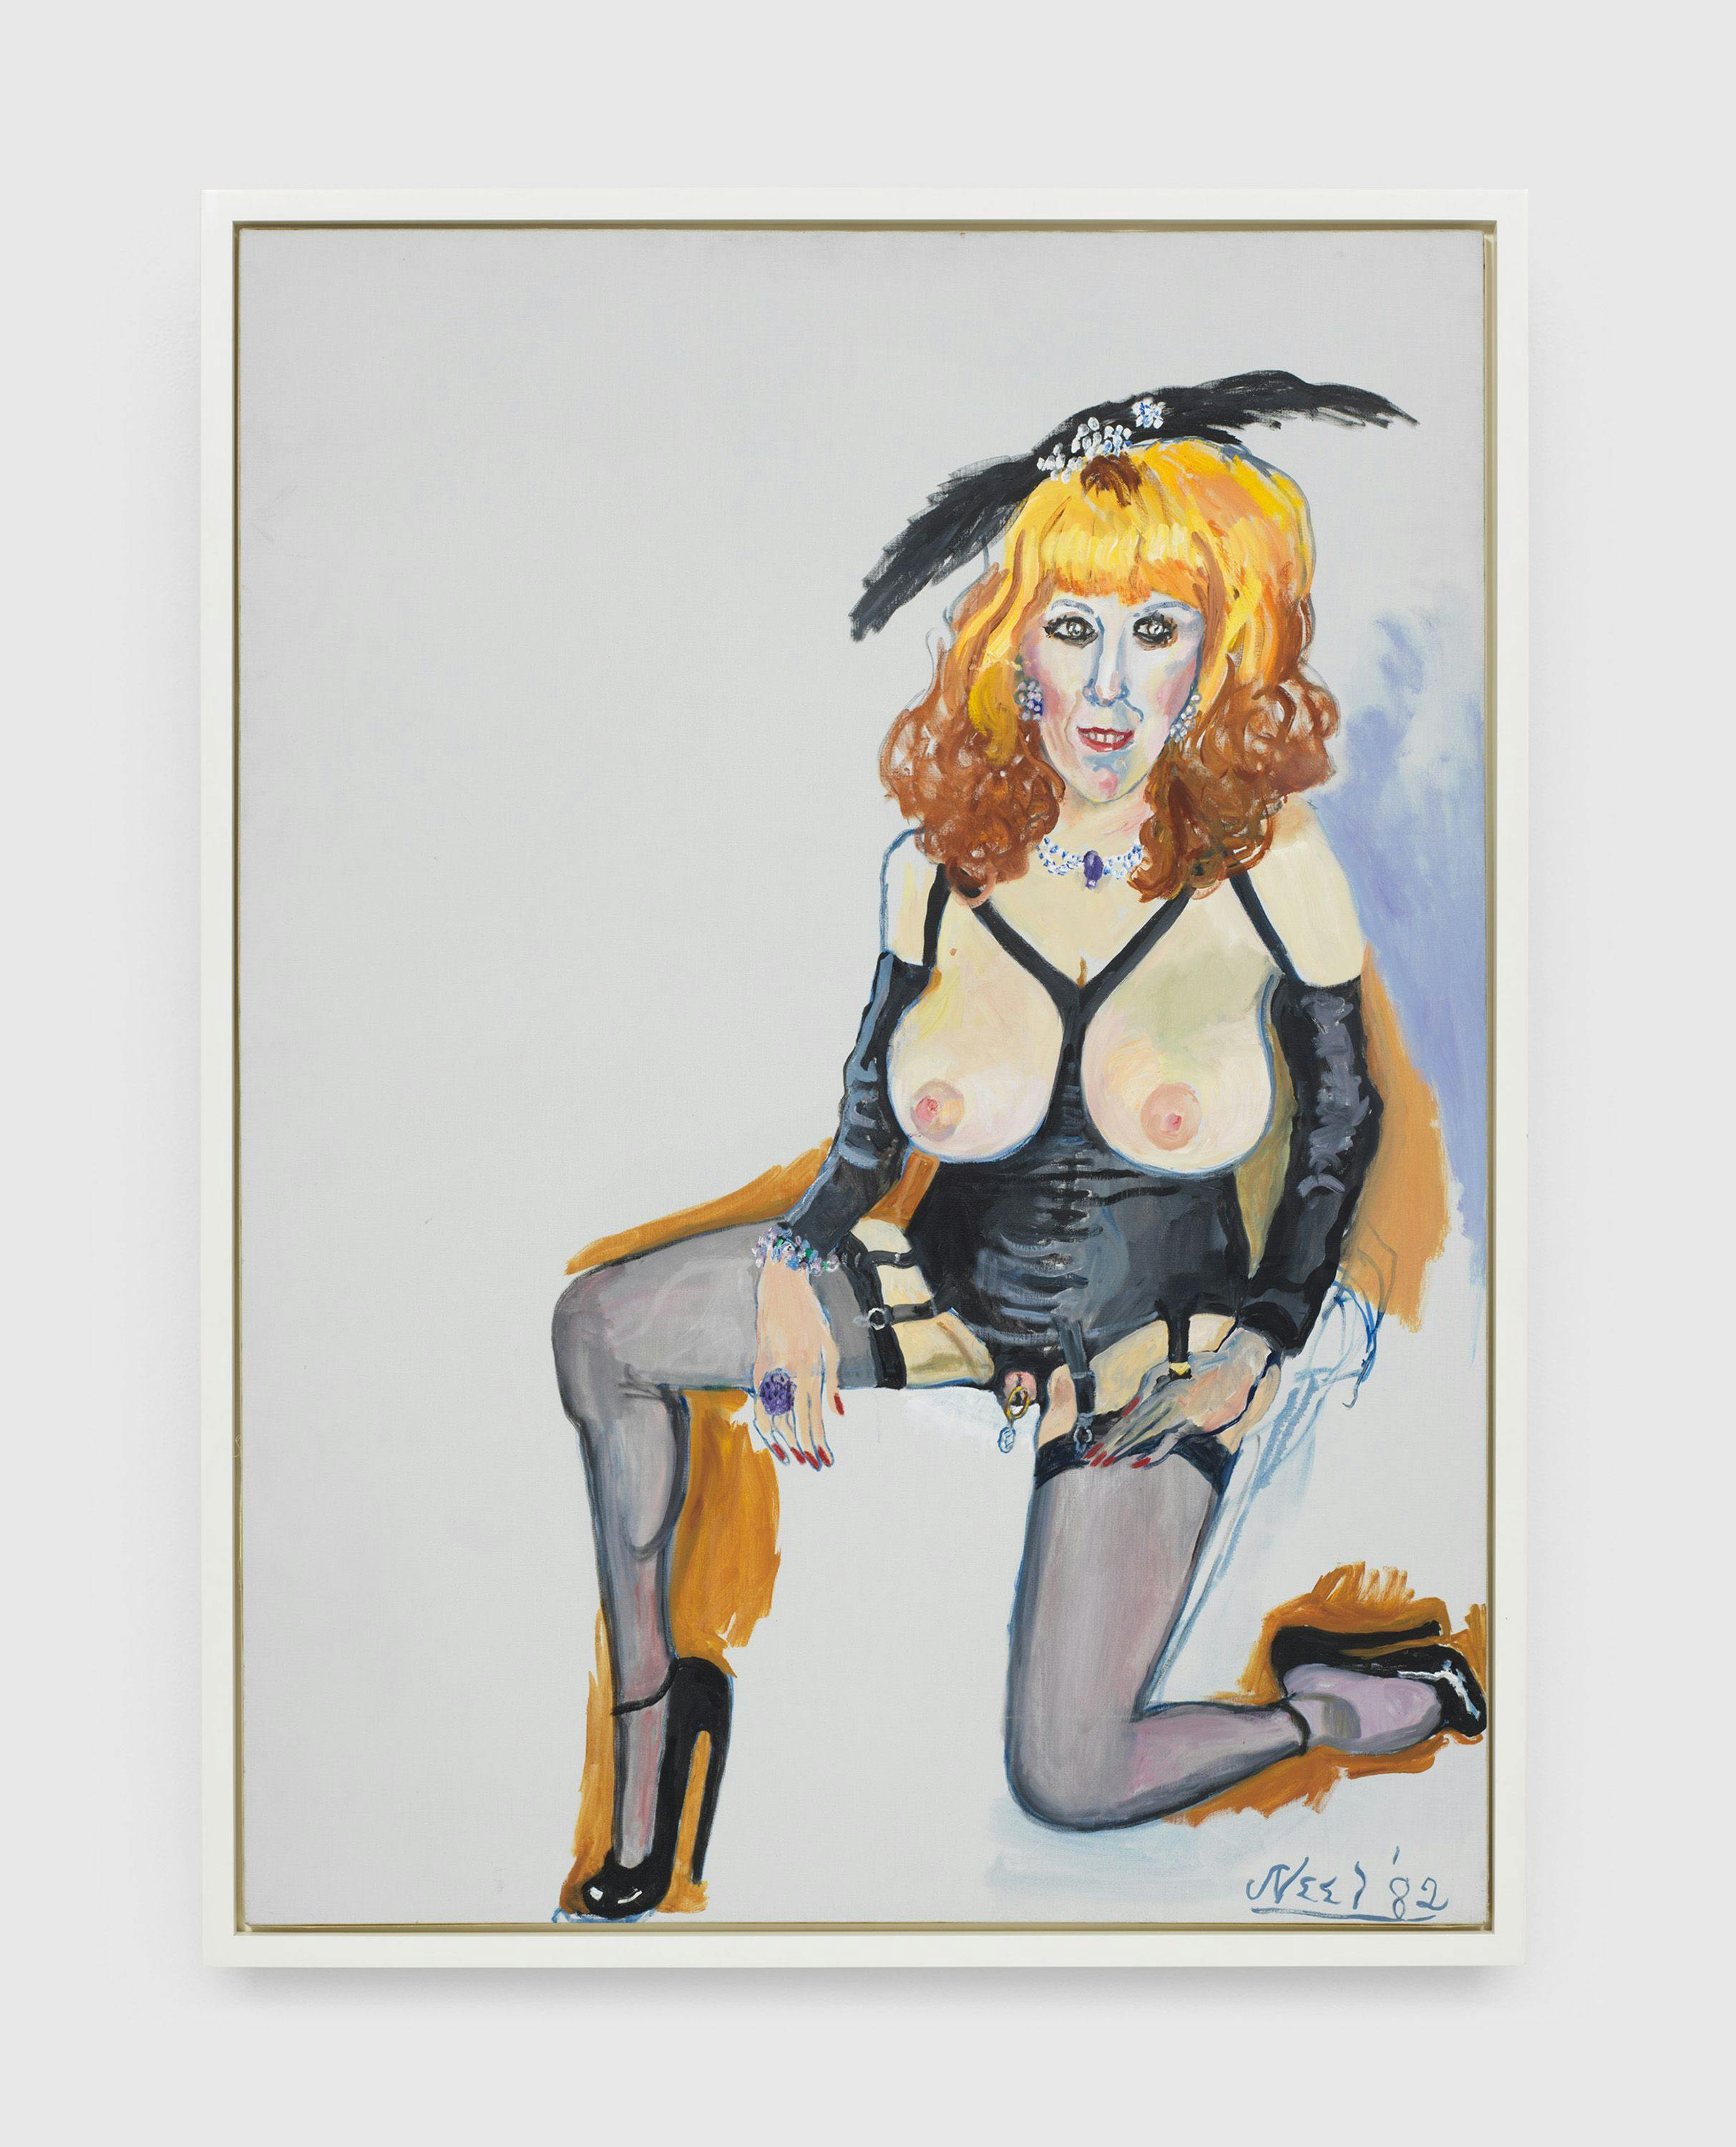 A painting by Alice Neel, titled Annie Sprinkle, dated 1982.